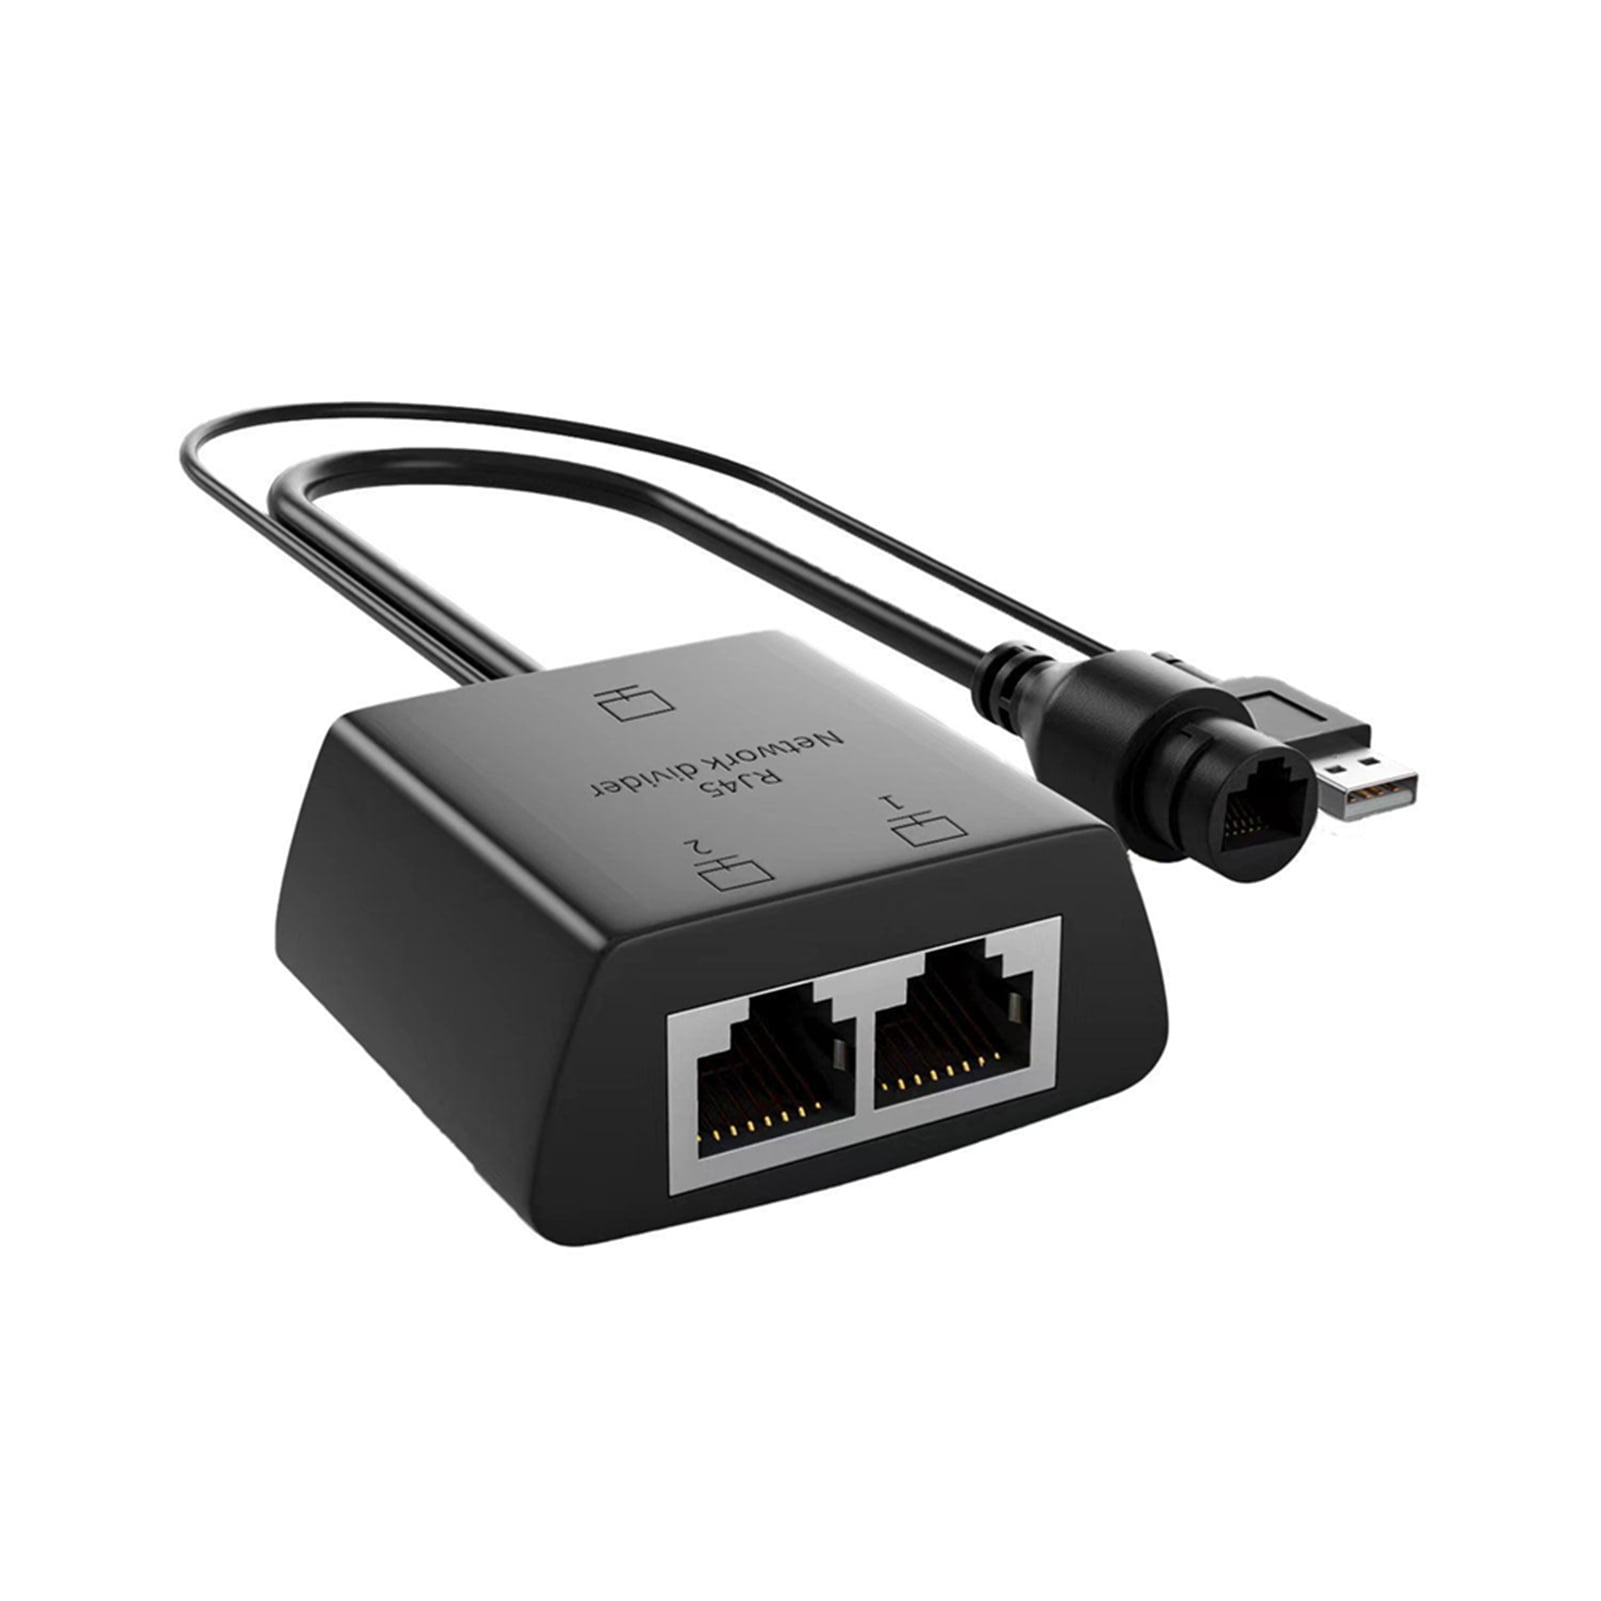 Ethernet Splitter 1 to 2 High Speed, RJ45 Network 1 to 2 Port Ethernet  Adapter Splitter [2 Devices Simultaneous Networking],100Mbps Extension  Connector with USB Power Cable for Cat5/5e/6/7/8 Cable 